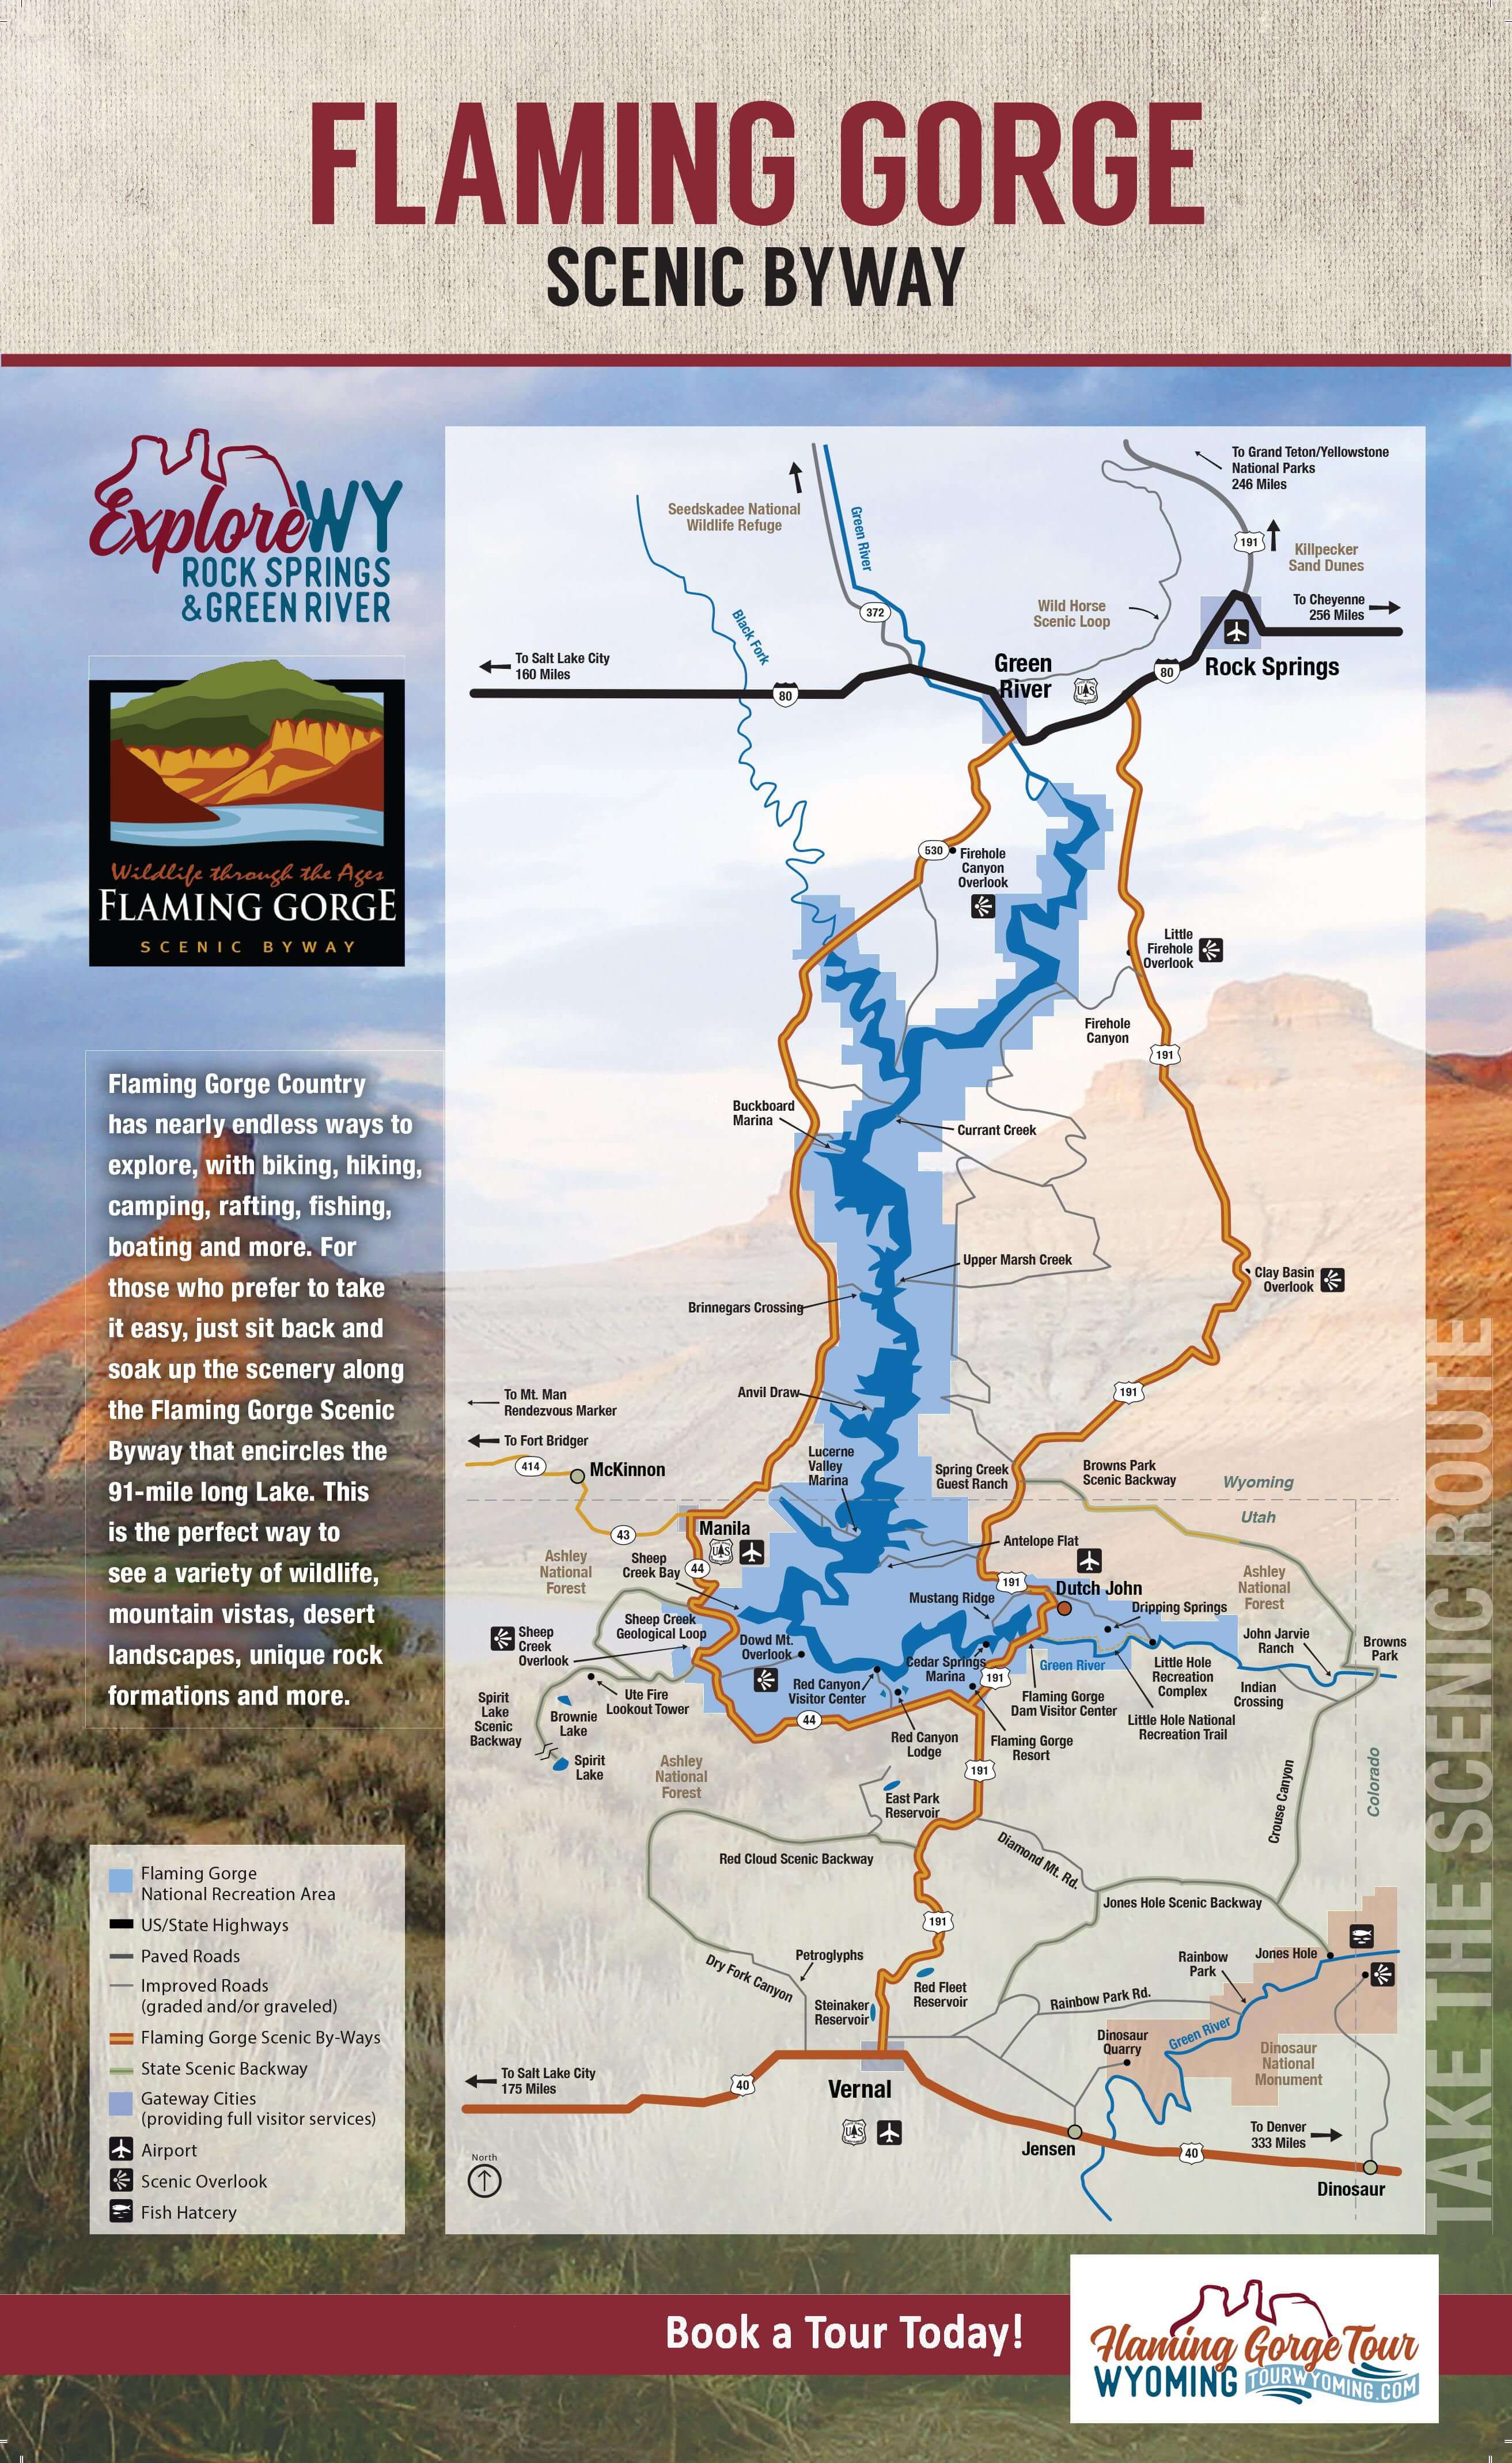 Map of Flaming Gorge Scenic byway